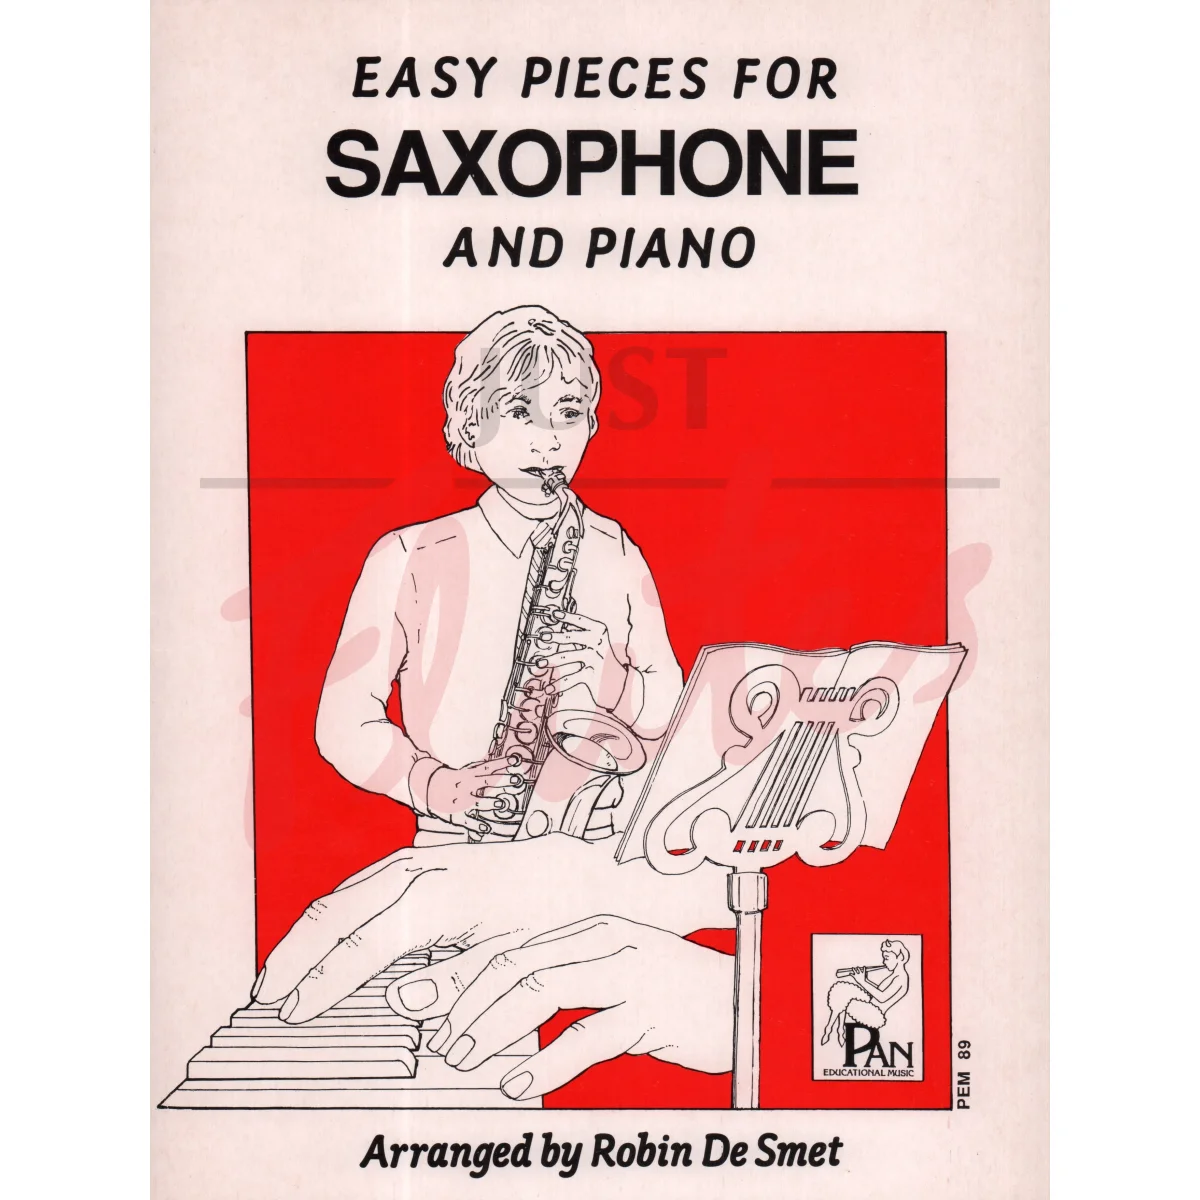 Easy Pieces for Saxophone and Piano